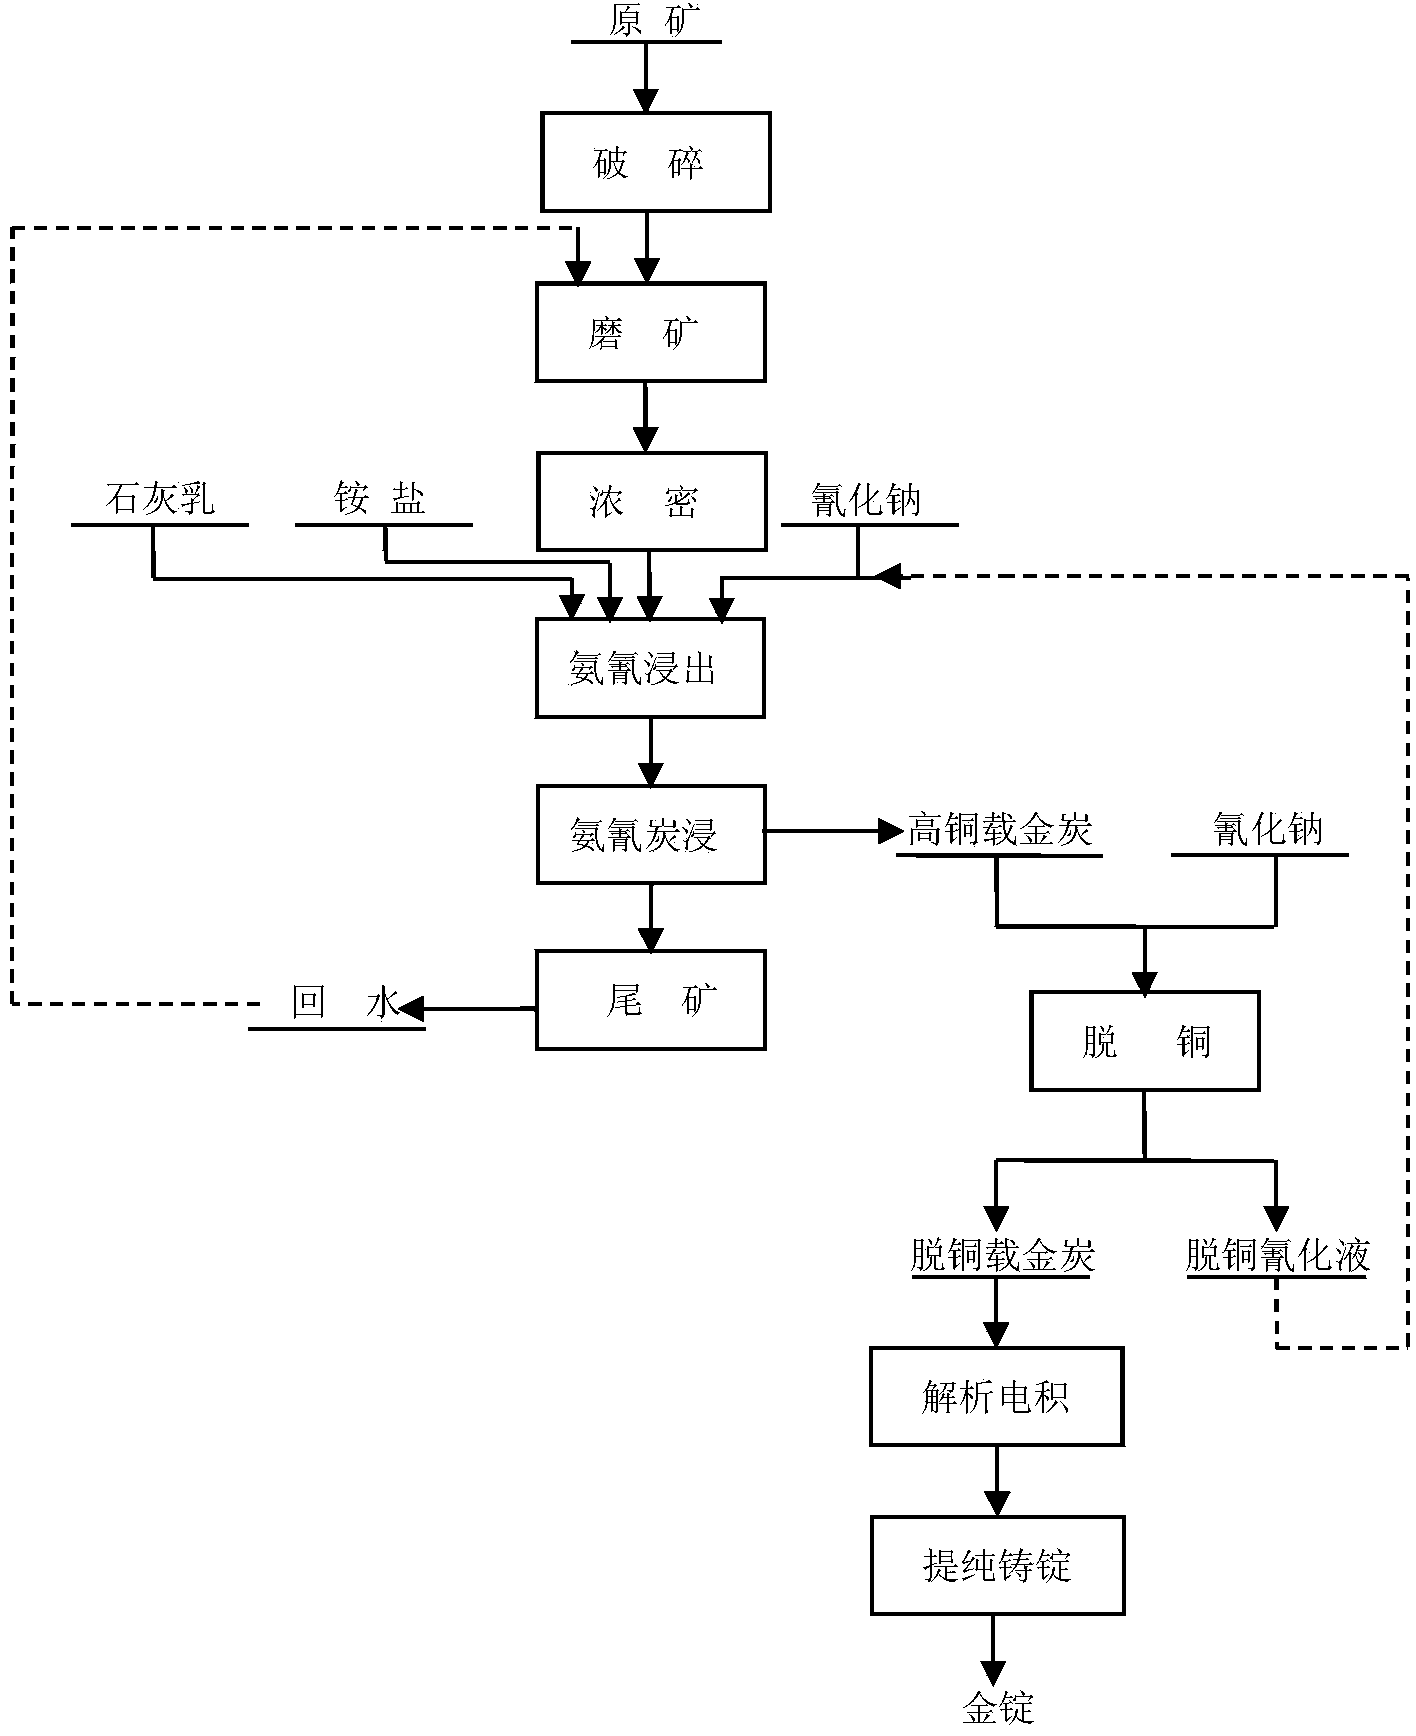 Process for extracting gold from gold ore containing copper by using ammonia, cyanide and carbon